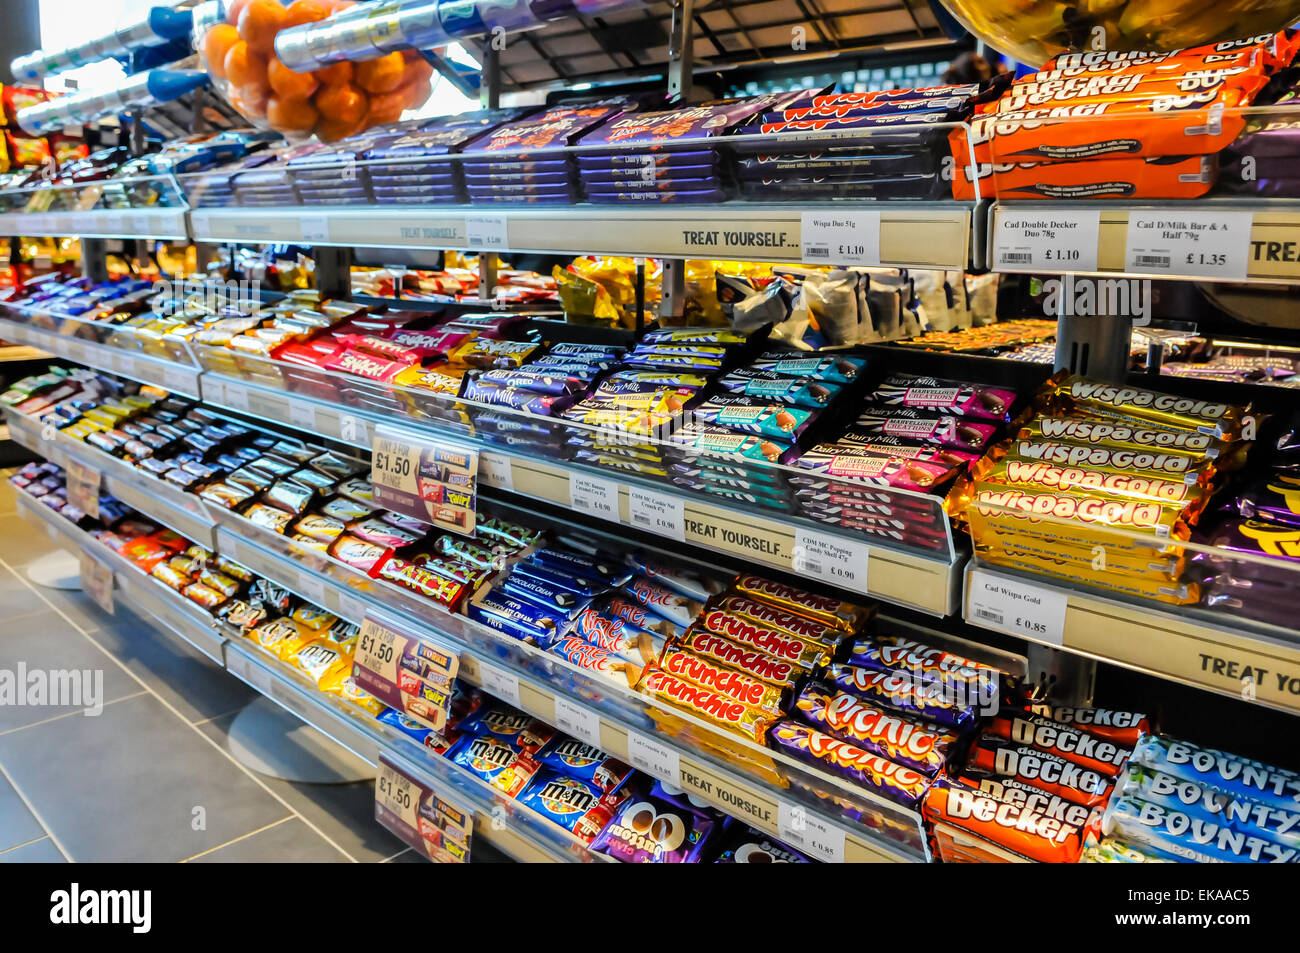 Sweets and chocolate bars on sale in a motorway service station shop Stock Photo